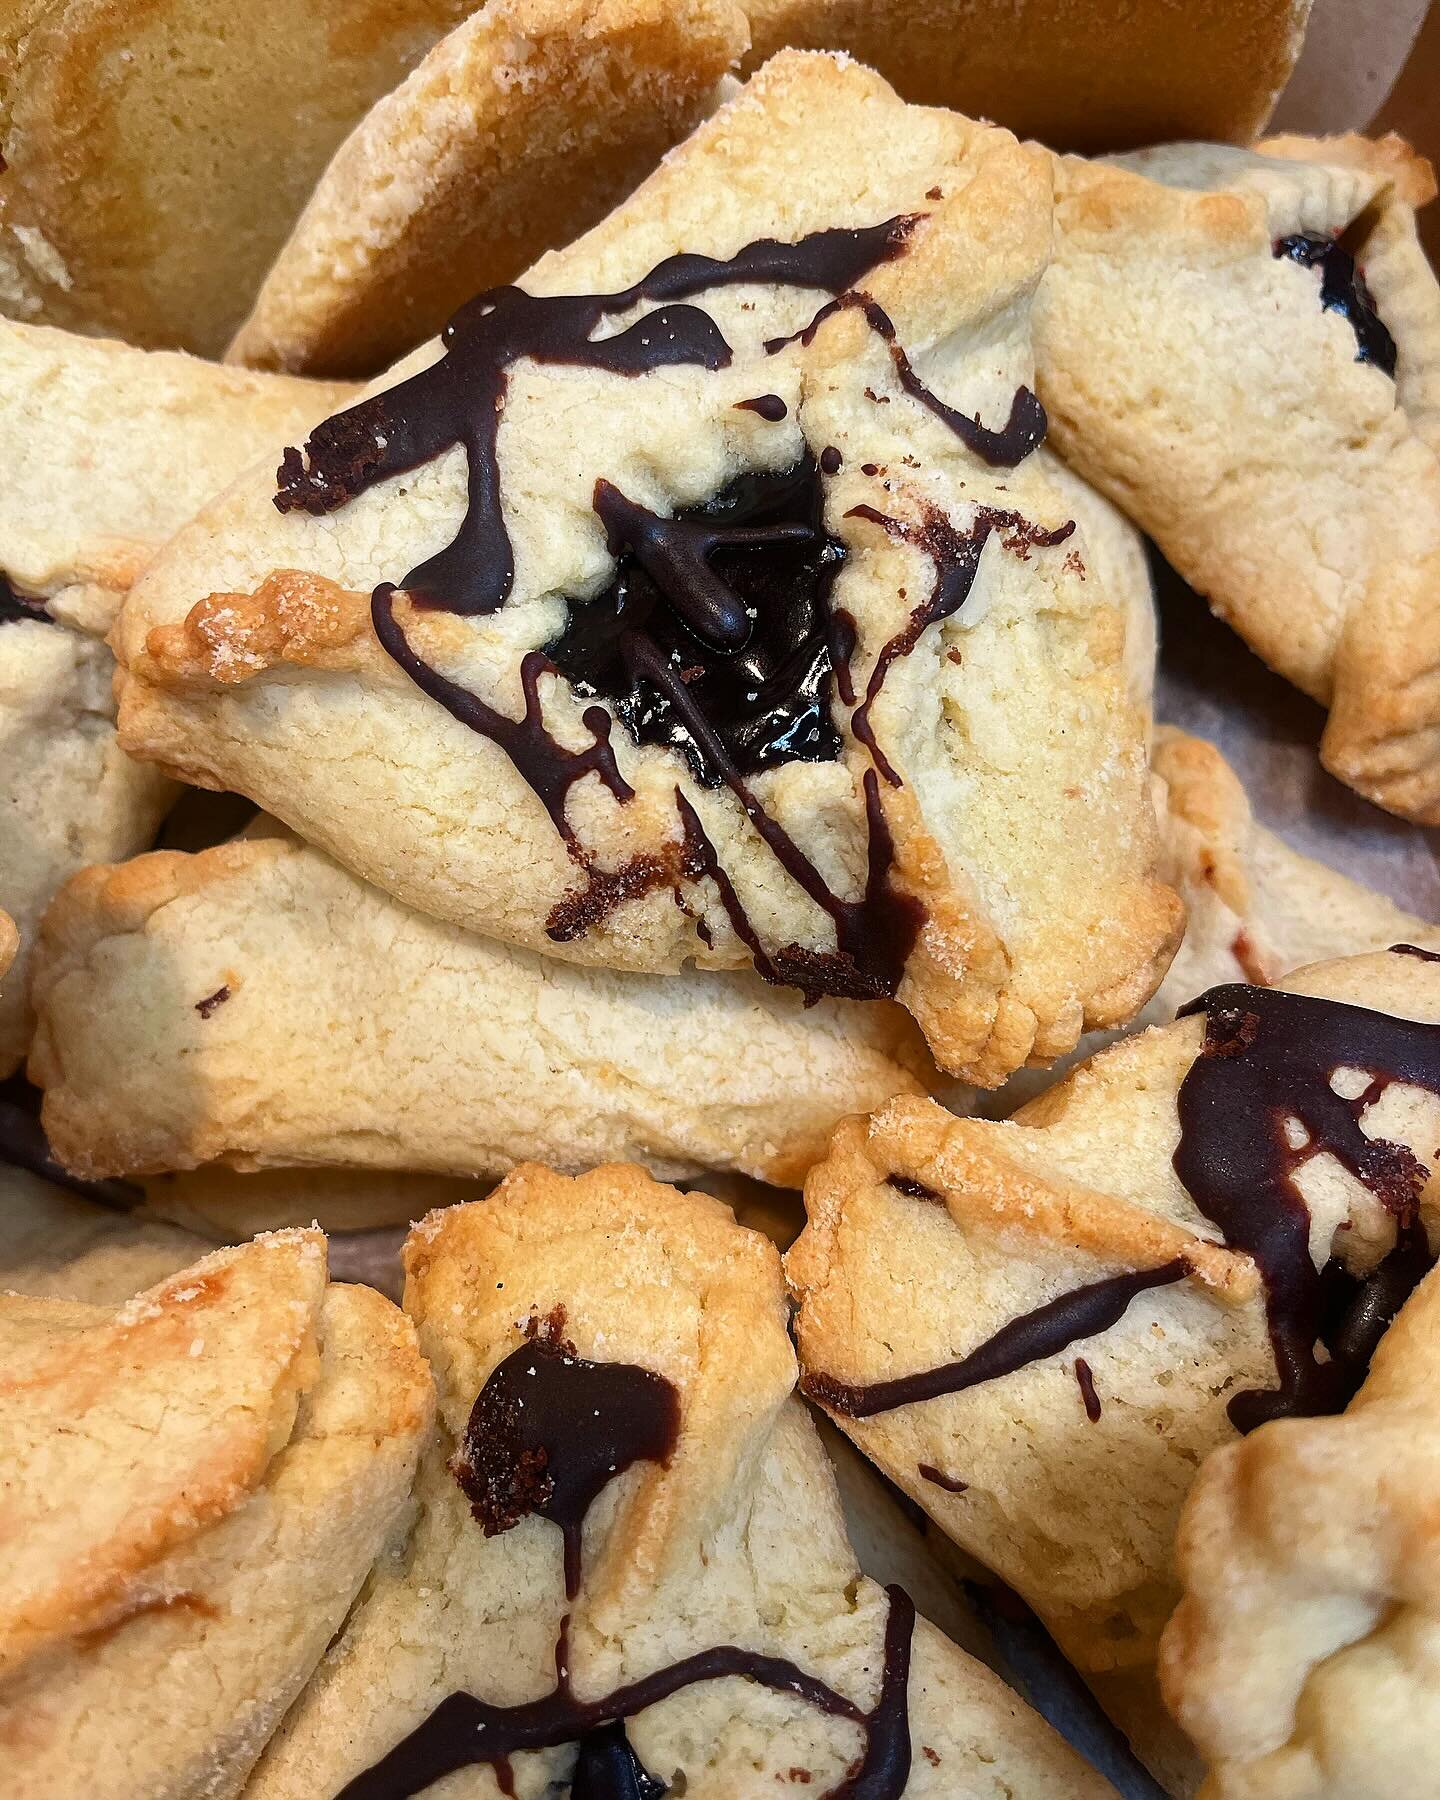 Up late thinking about chocolate hamantaschen? Us too. Come pick some fresh ones up in the morning #NoOtherDeli